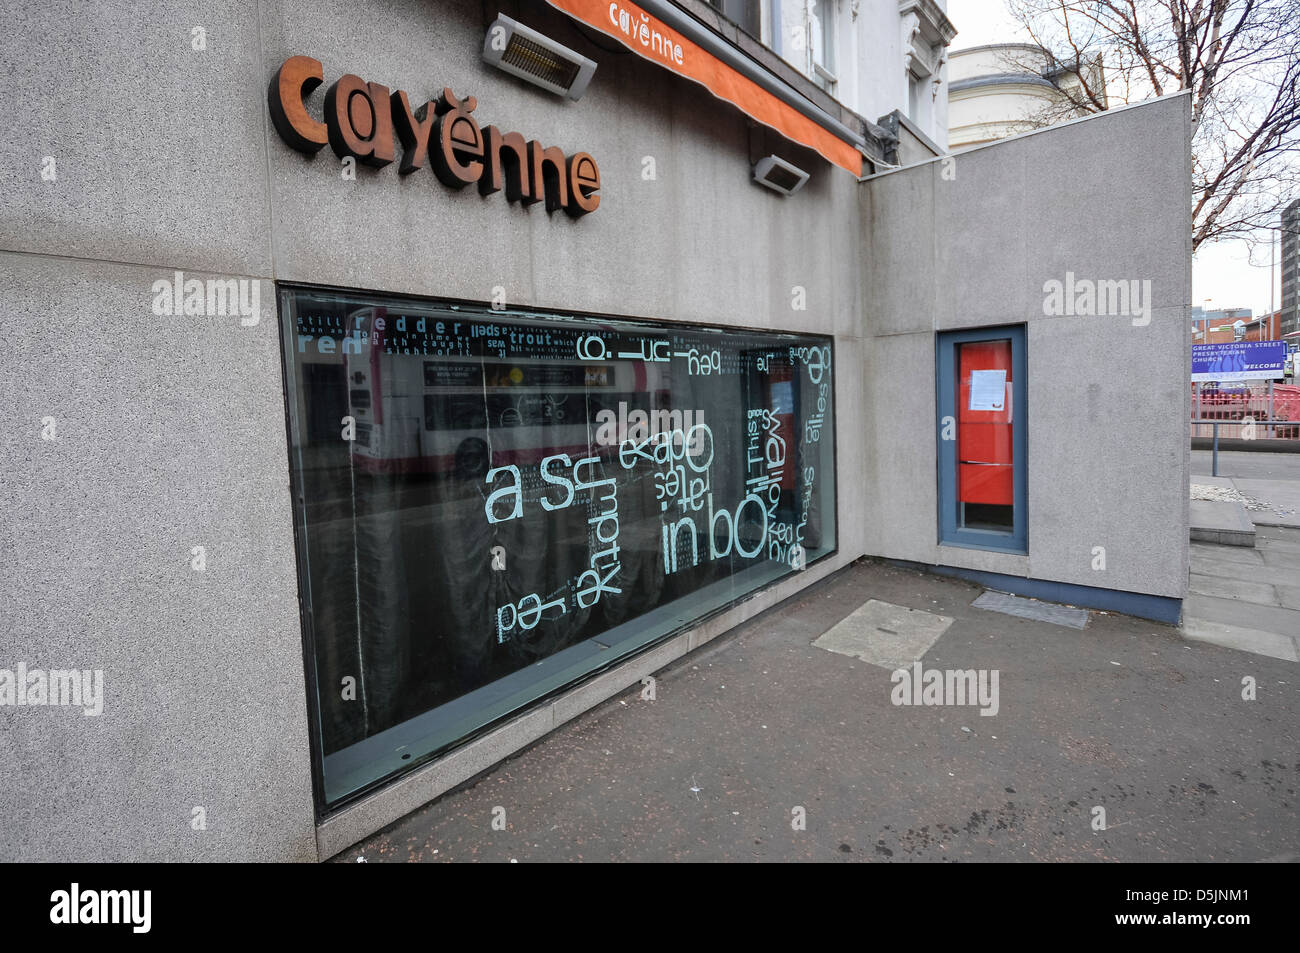 Cayenne restaurant in Belfast, recently closed by celebrity chef owner Paul Rankin. Stock Photo